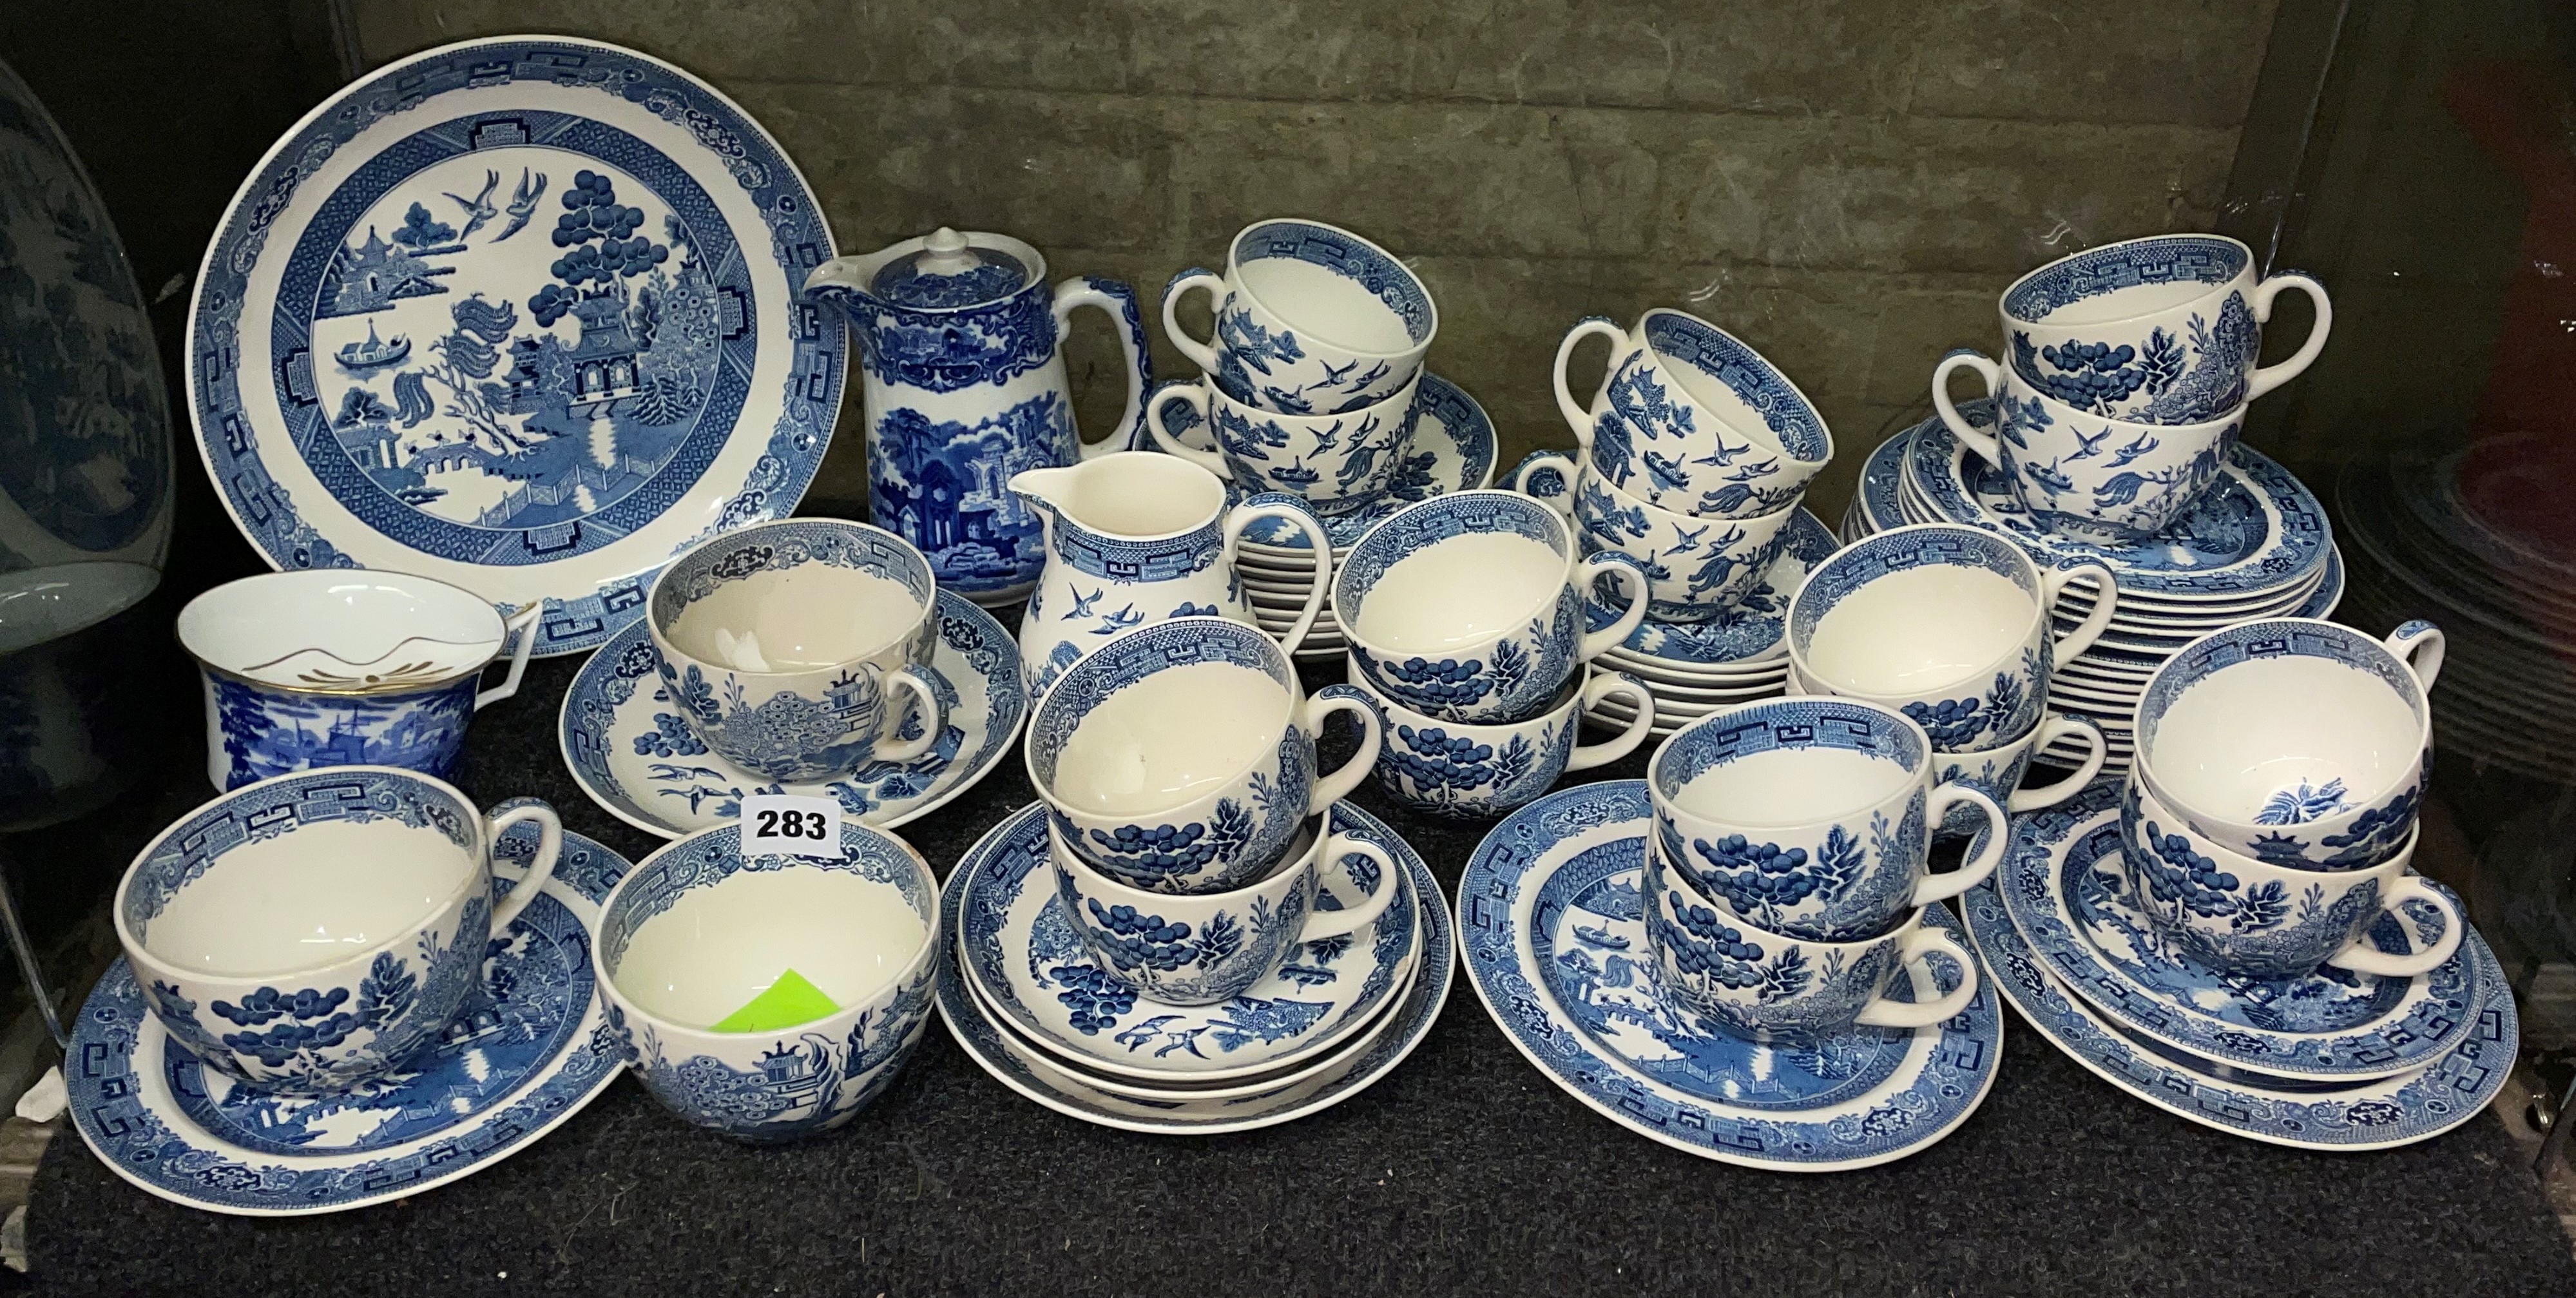 SHELF OF WEDGWOOD BLUE AND WHITE WILLOW PATTERN TEA WARES